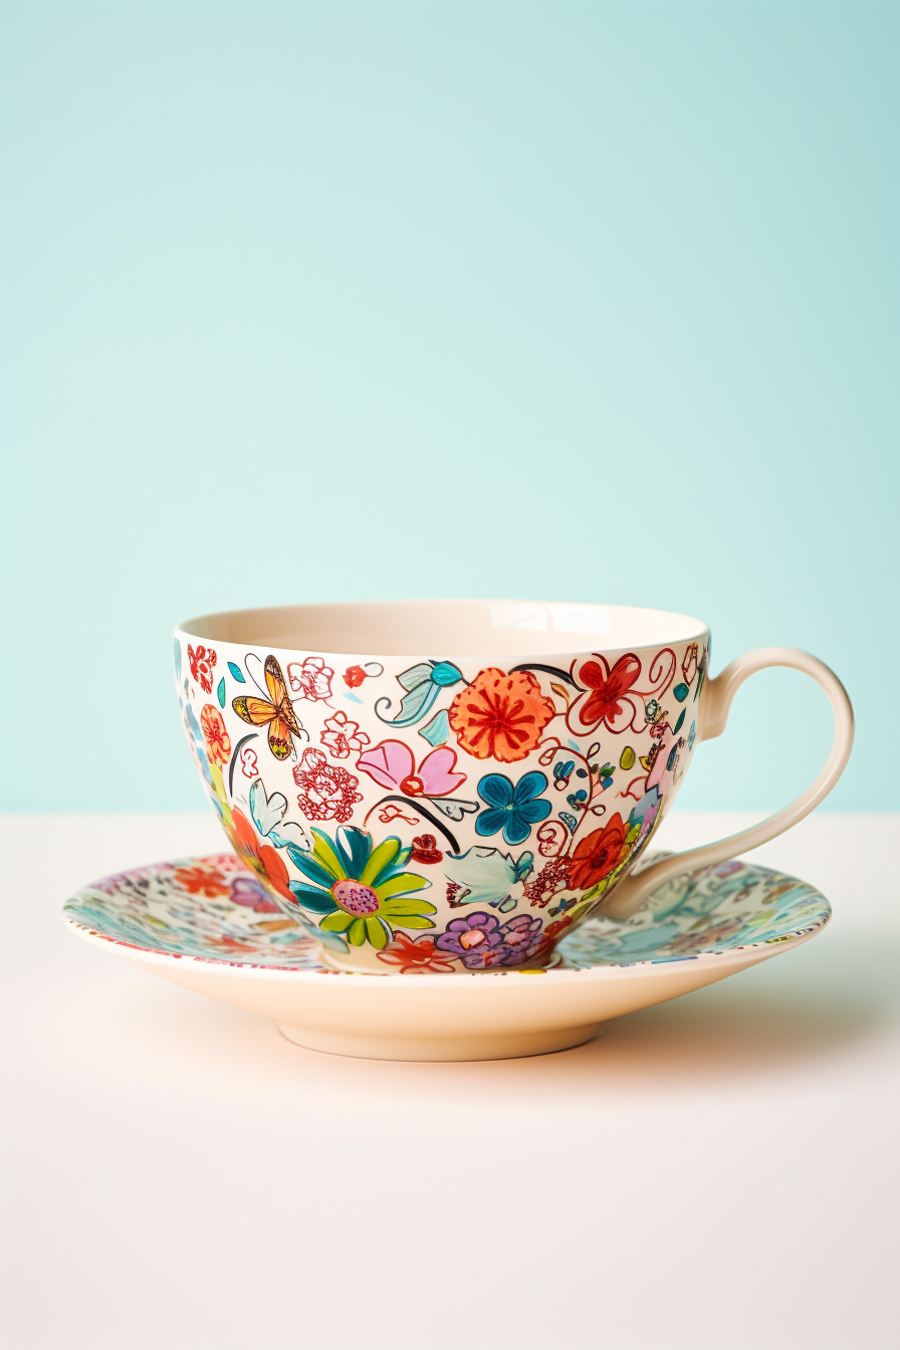 A colorful tea cup and saucer on a blue background.